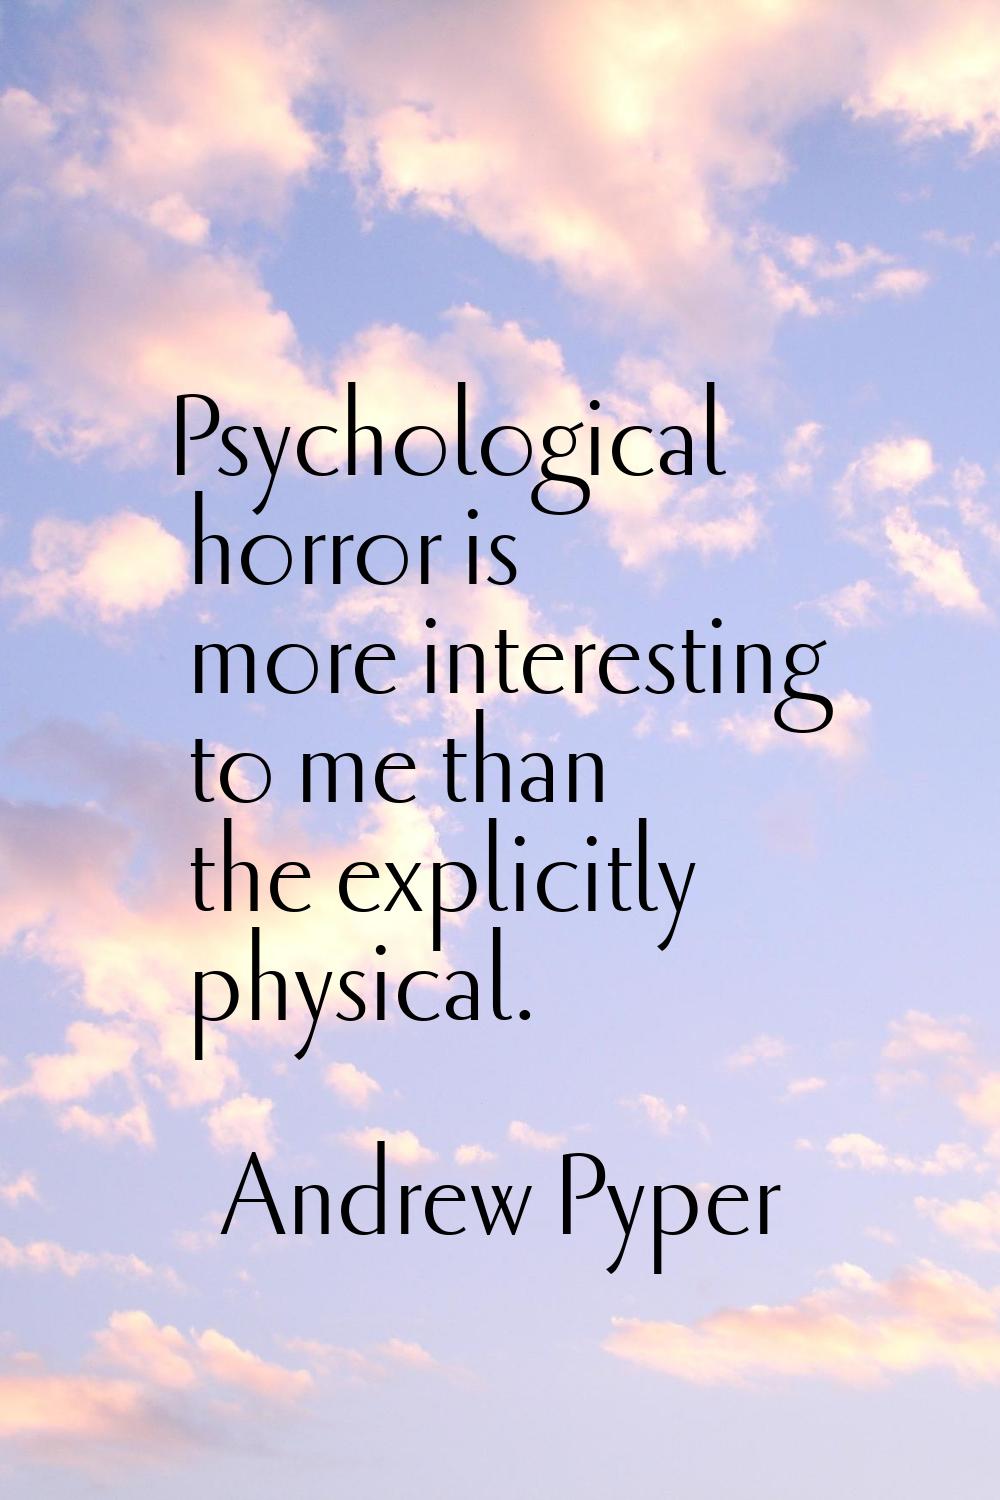 Psychological horror is more interesting to me than the explicitly physical.